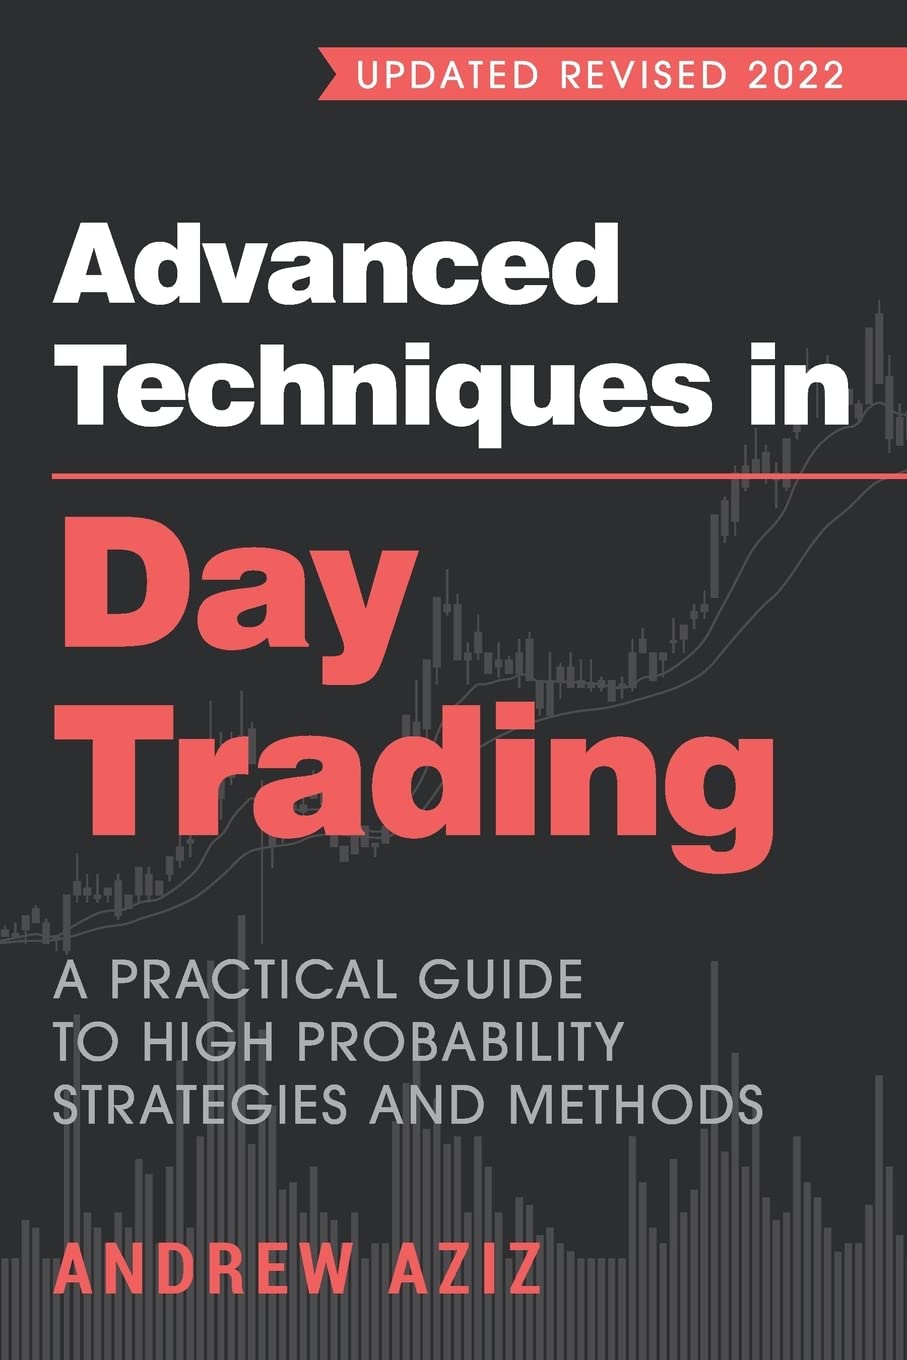 Advanced Techniques in Day Trading Paperback by Andrew Aziz